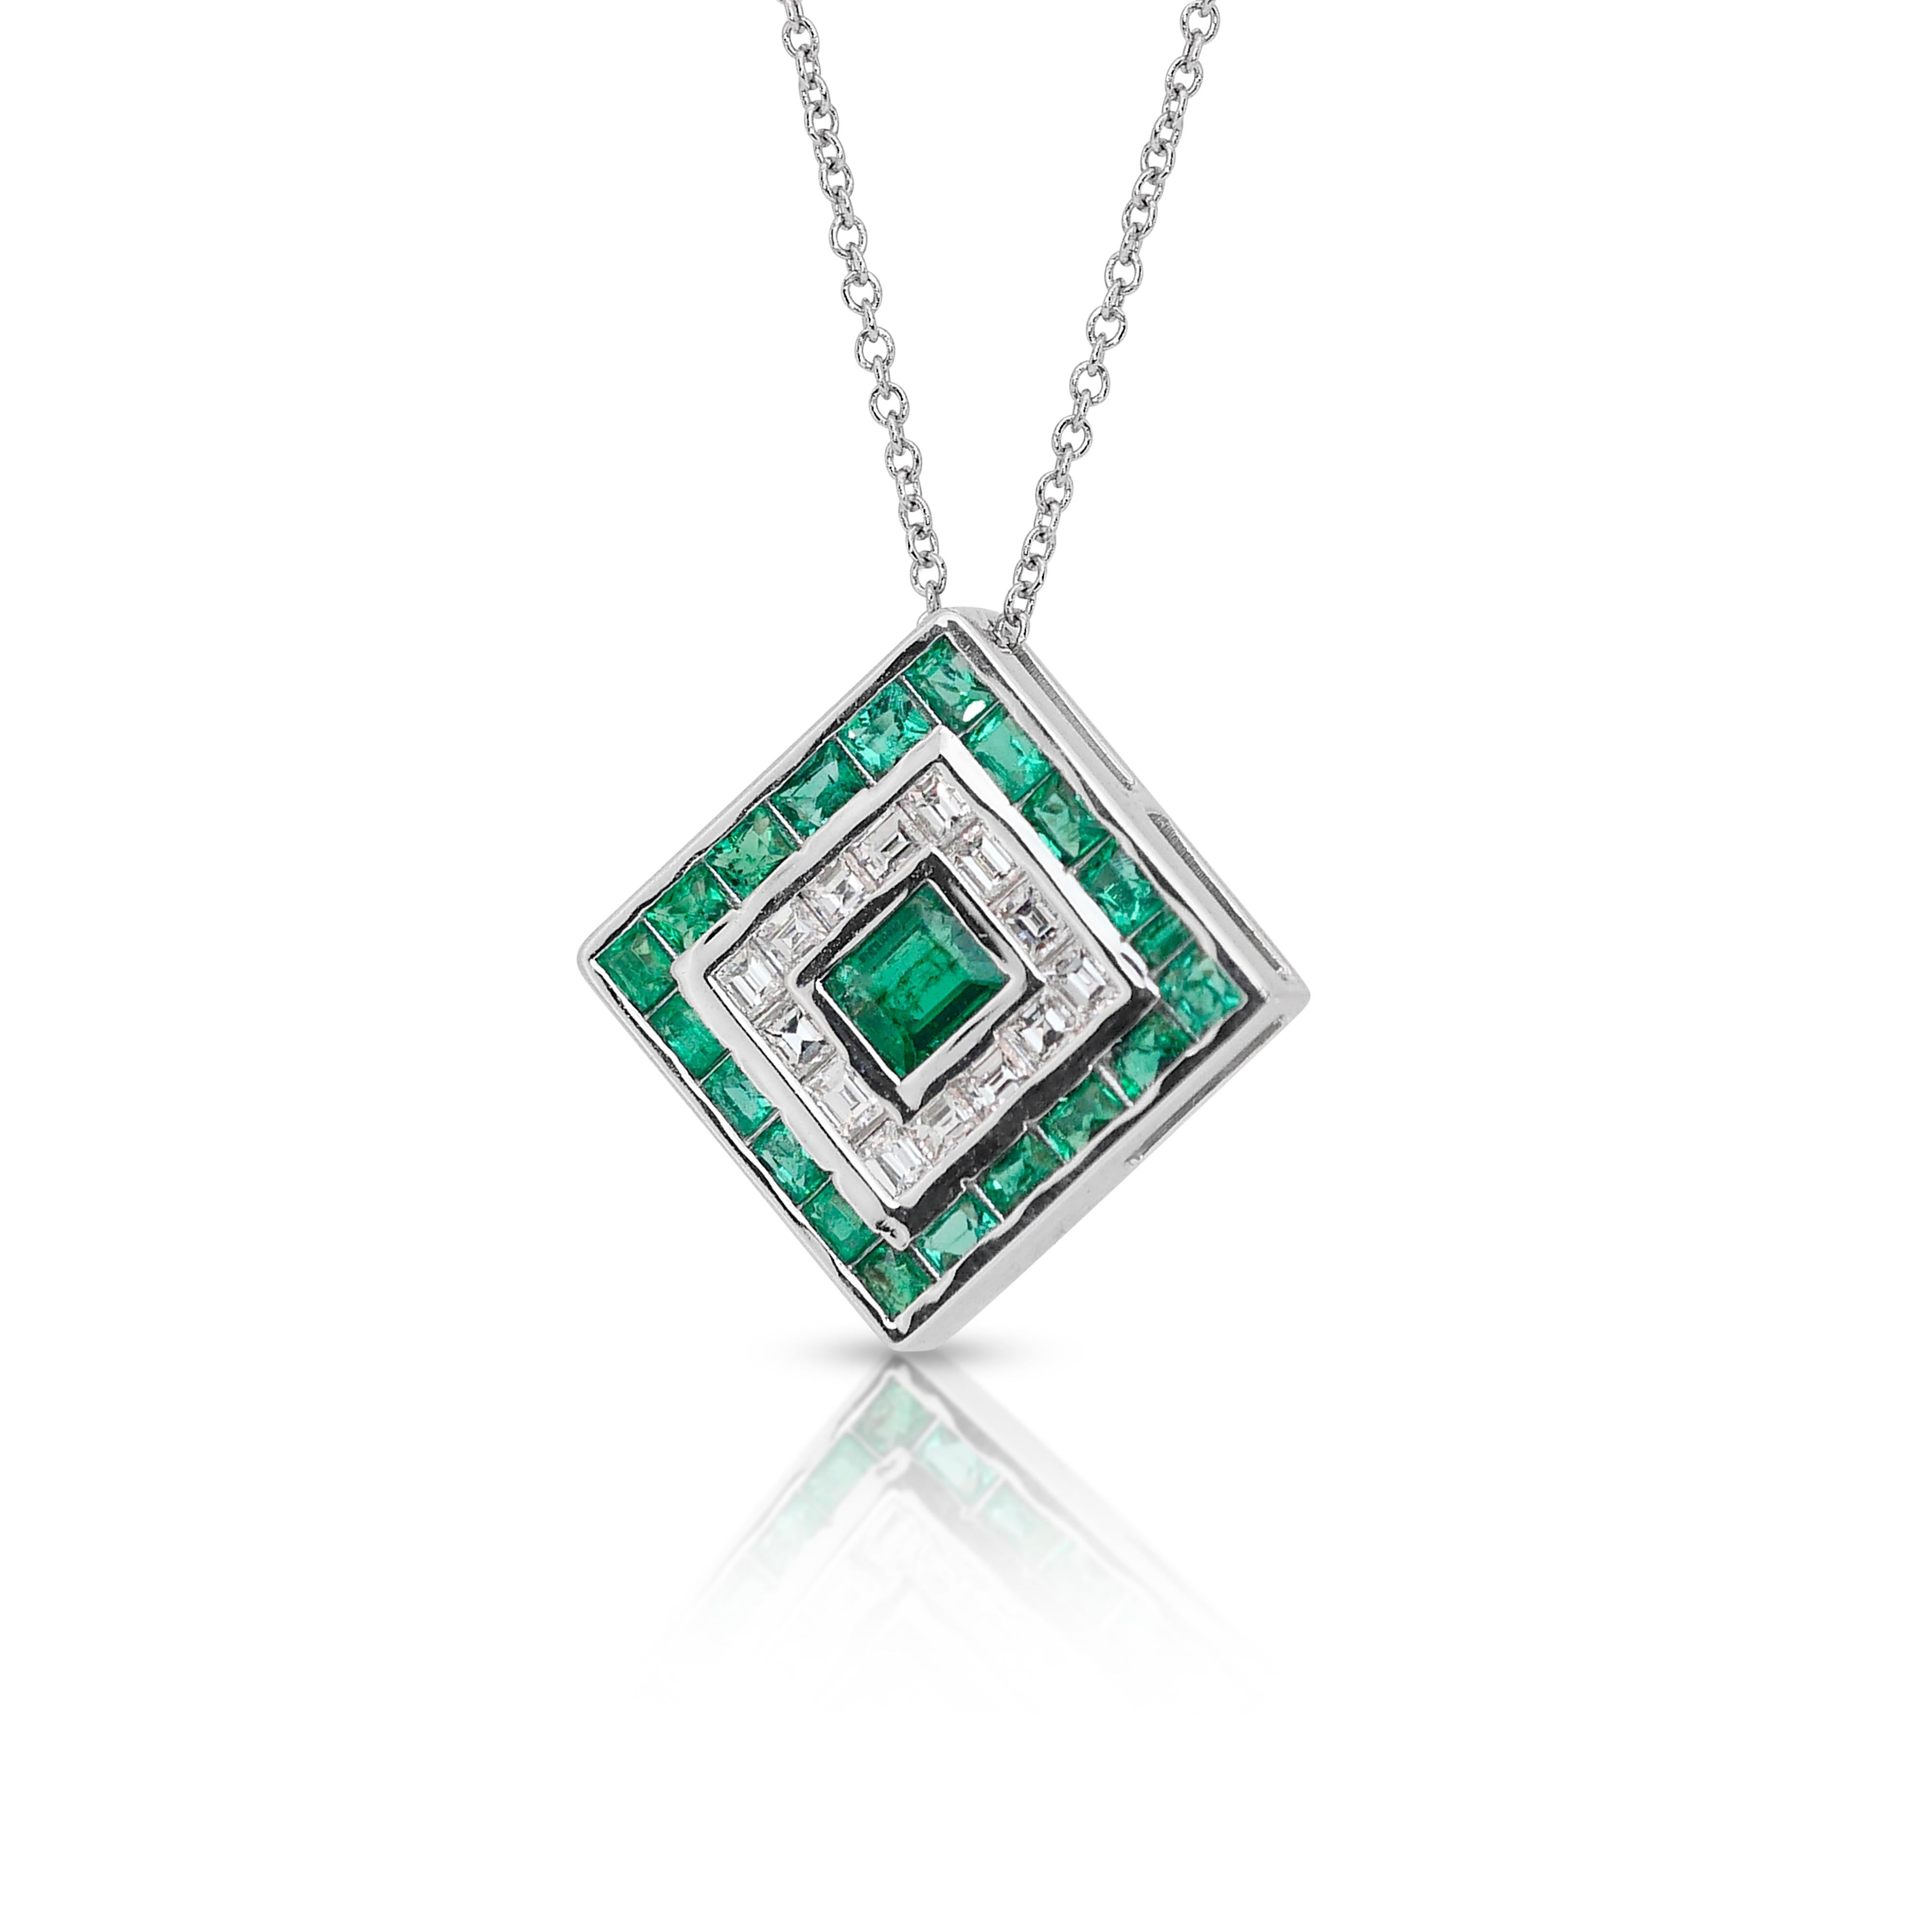 Captivating 1.45ct Emeralds and Diamonds Halo Necklace in 14k White Gold - IGI  In New Condition For Sale In רמת גן, IL